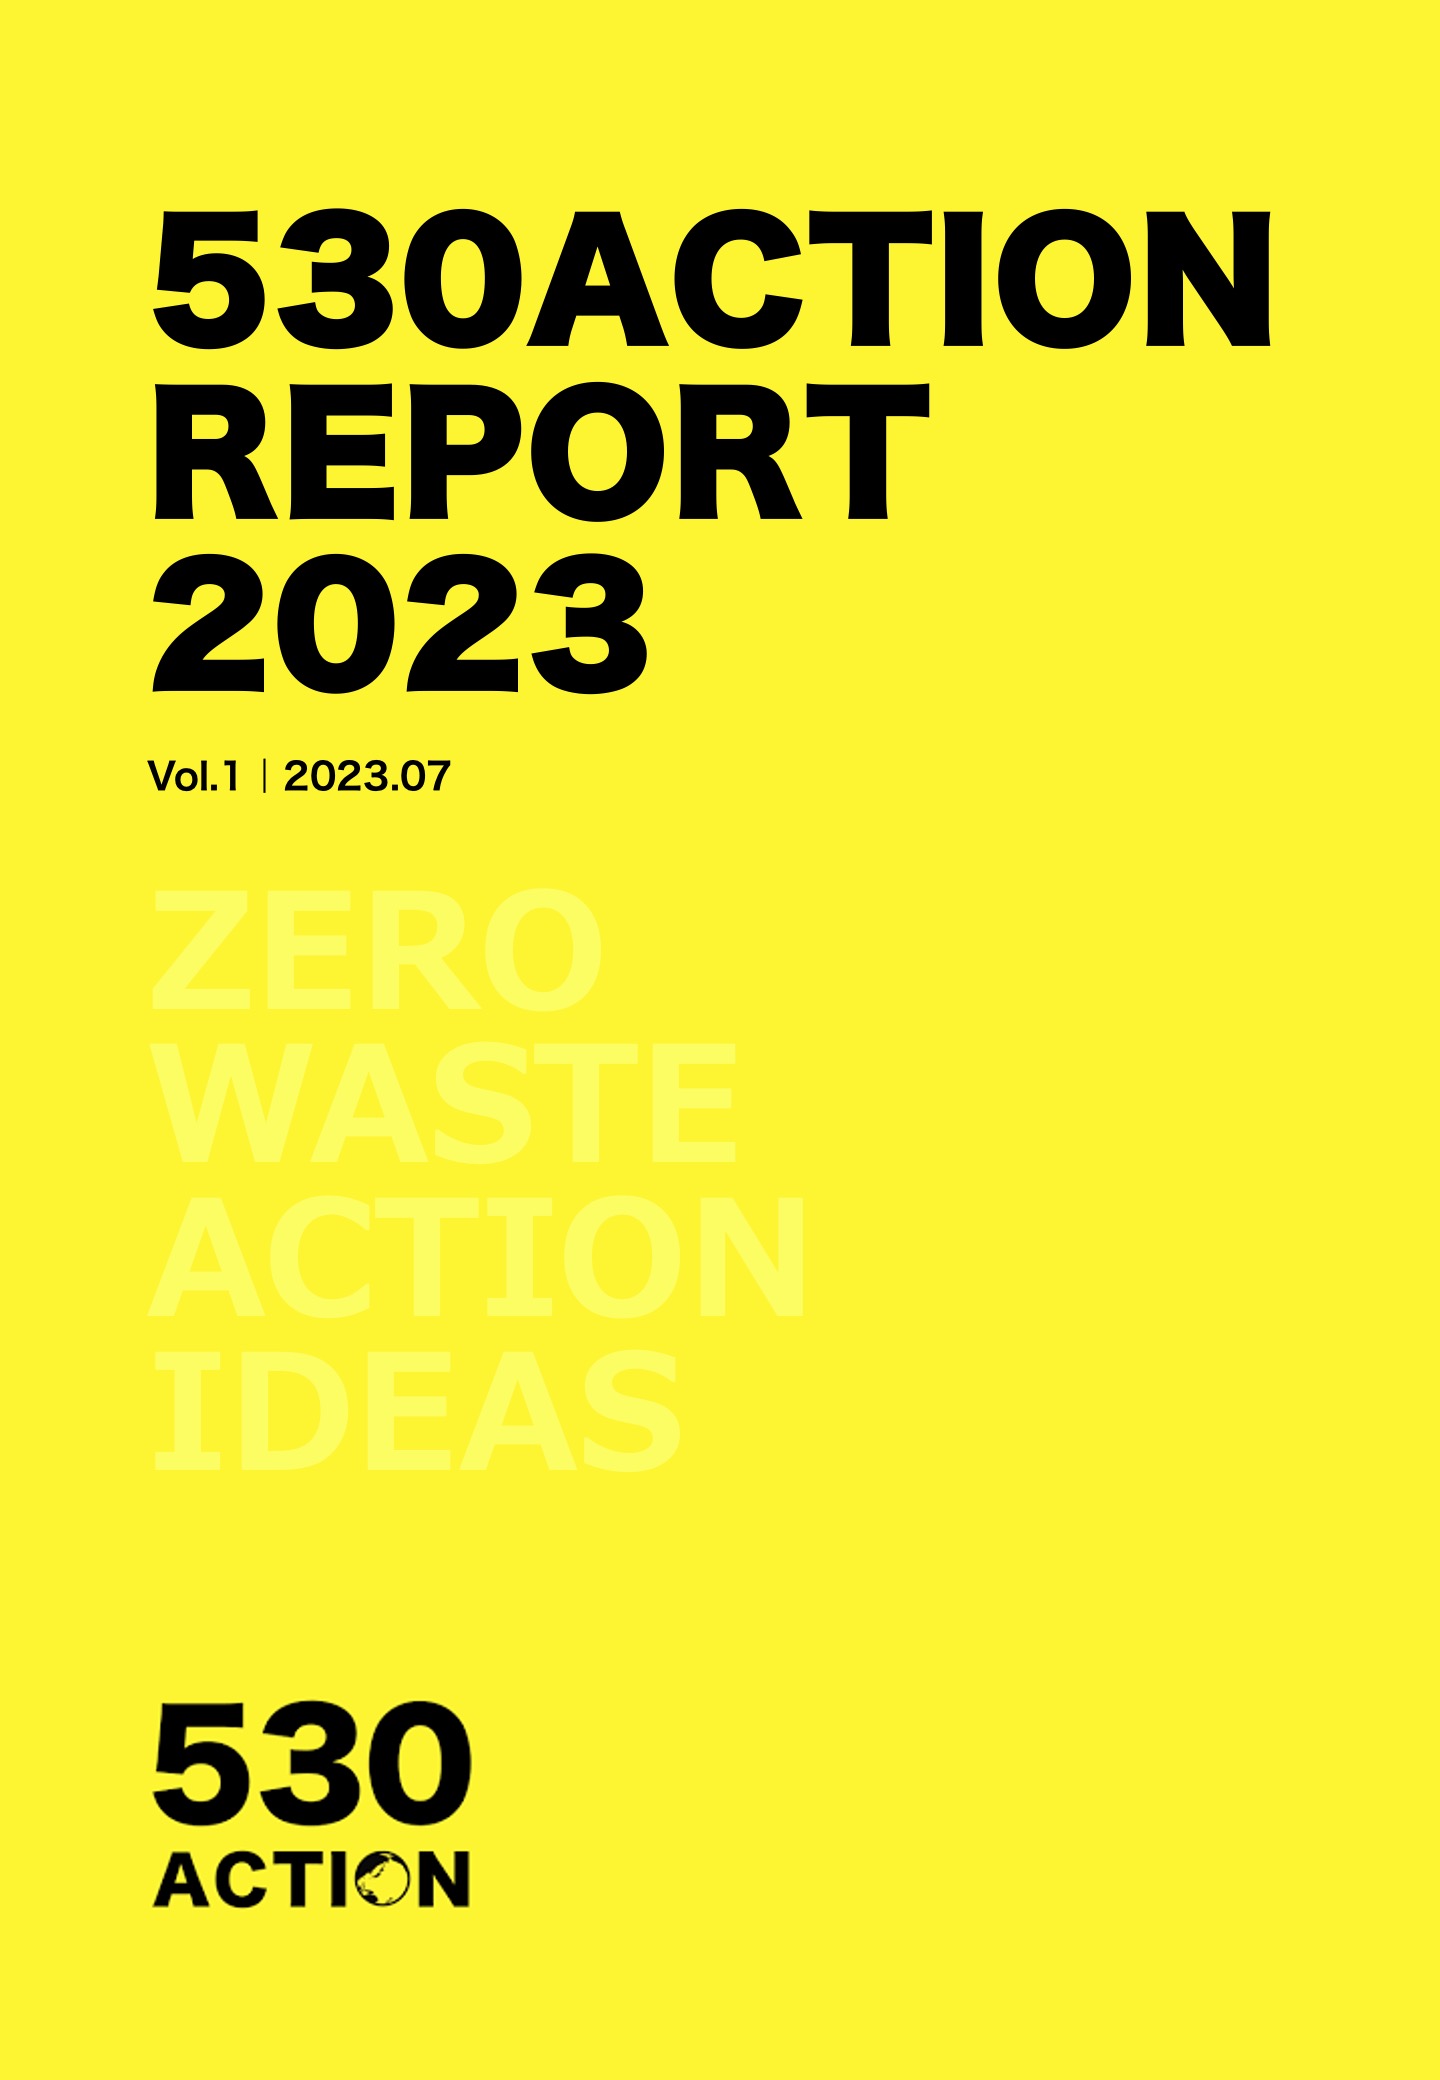 530 action report 2023の１